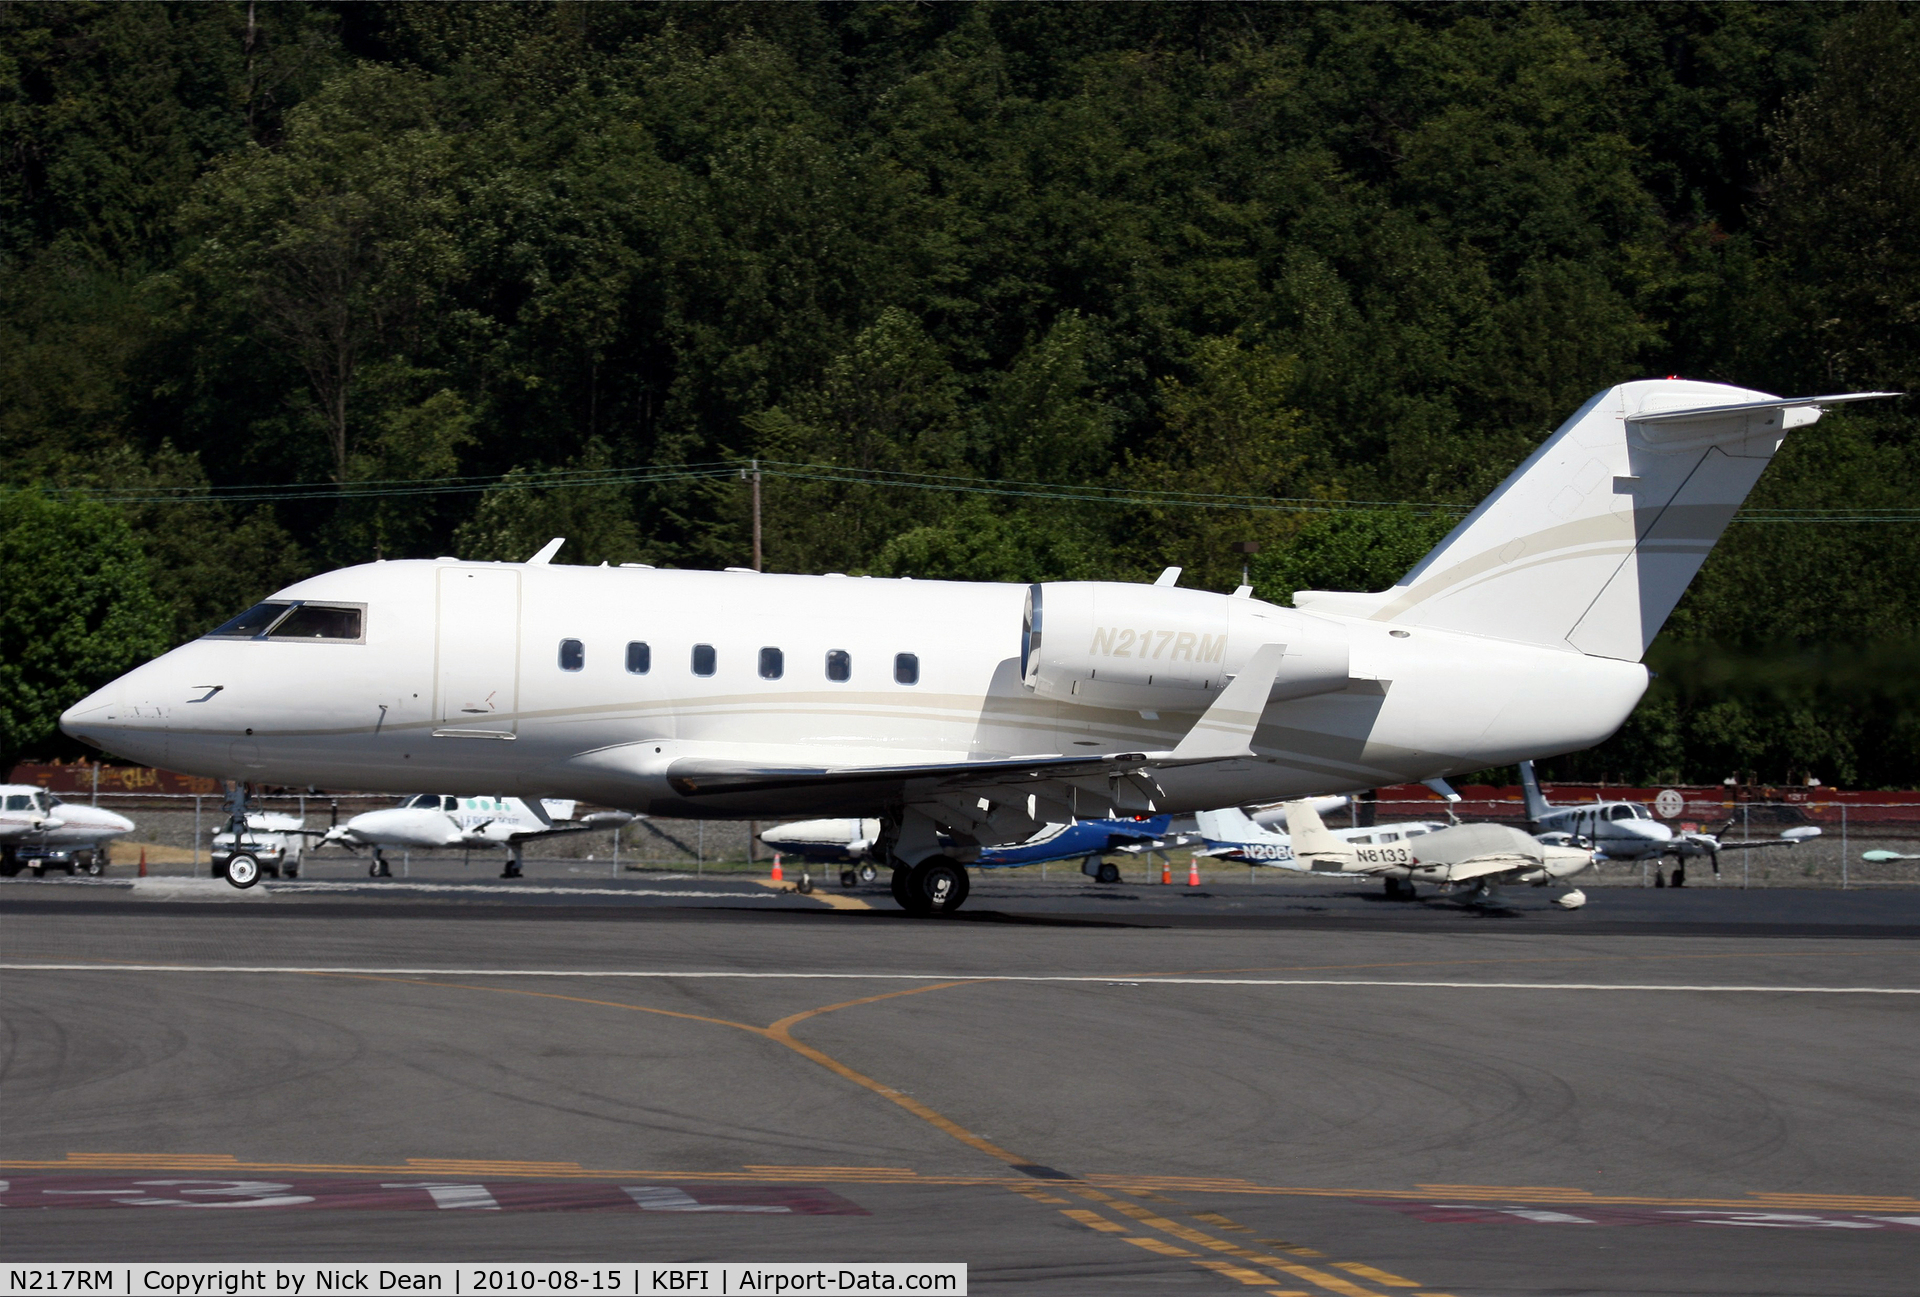 N217RM, 1982 Canadair Challenger 600S (CL-600-1A11) C/N 1054, KBFI 38th anniversary of beginning spotting 8/15/72